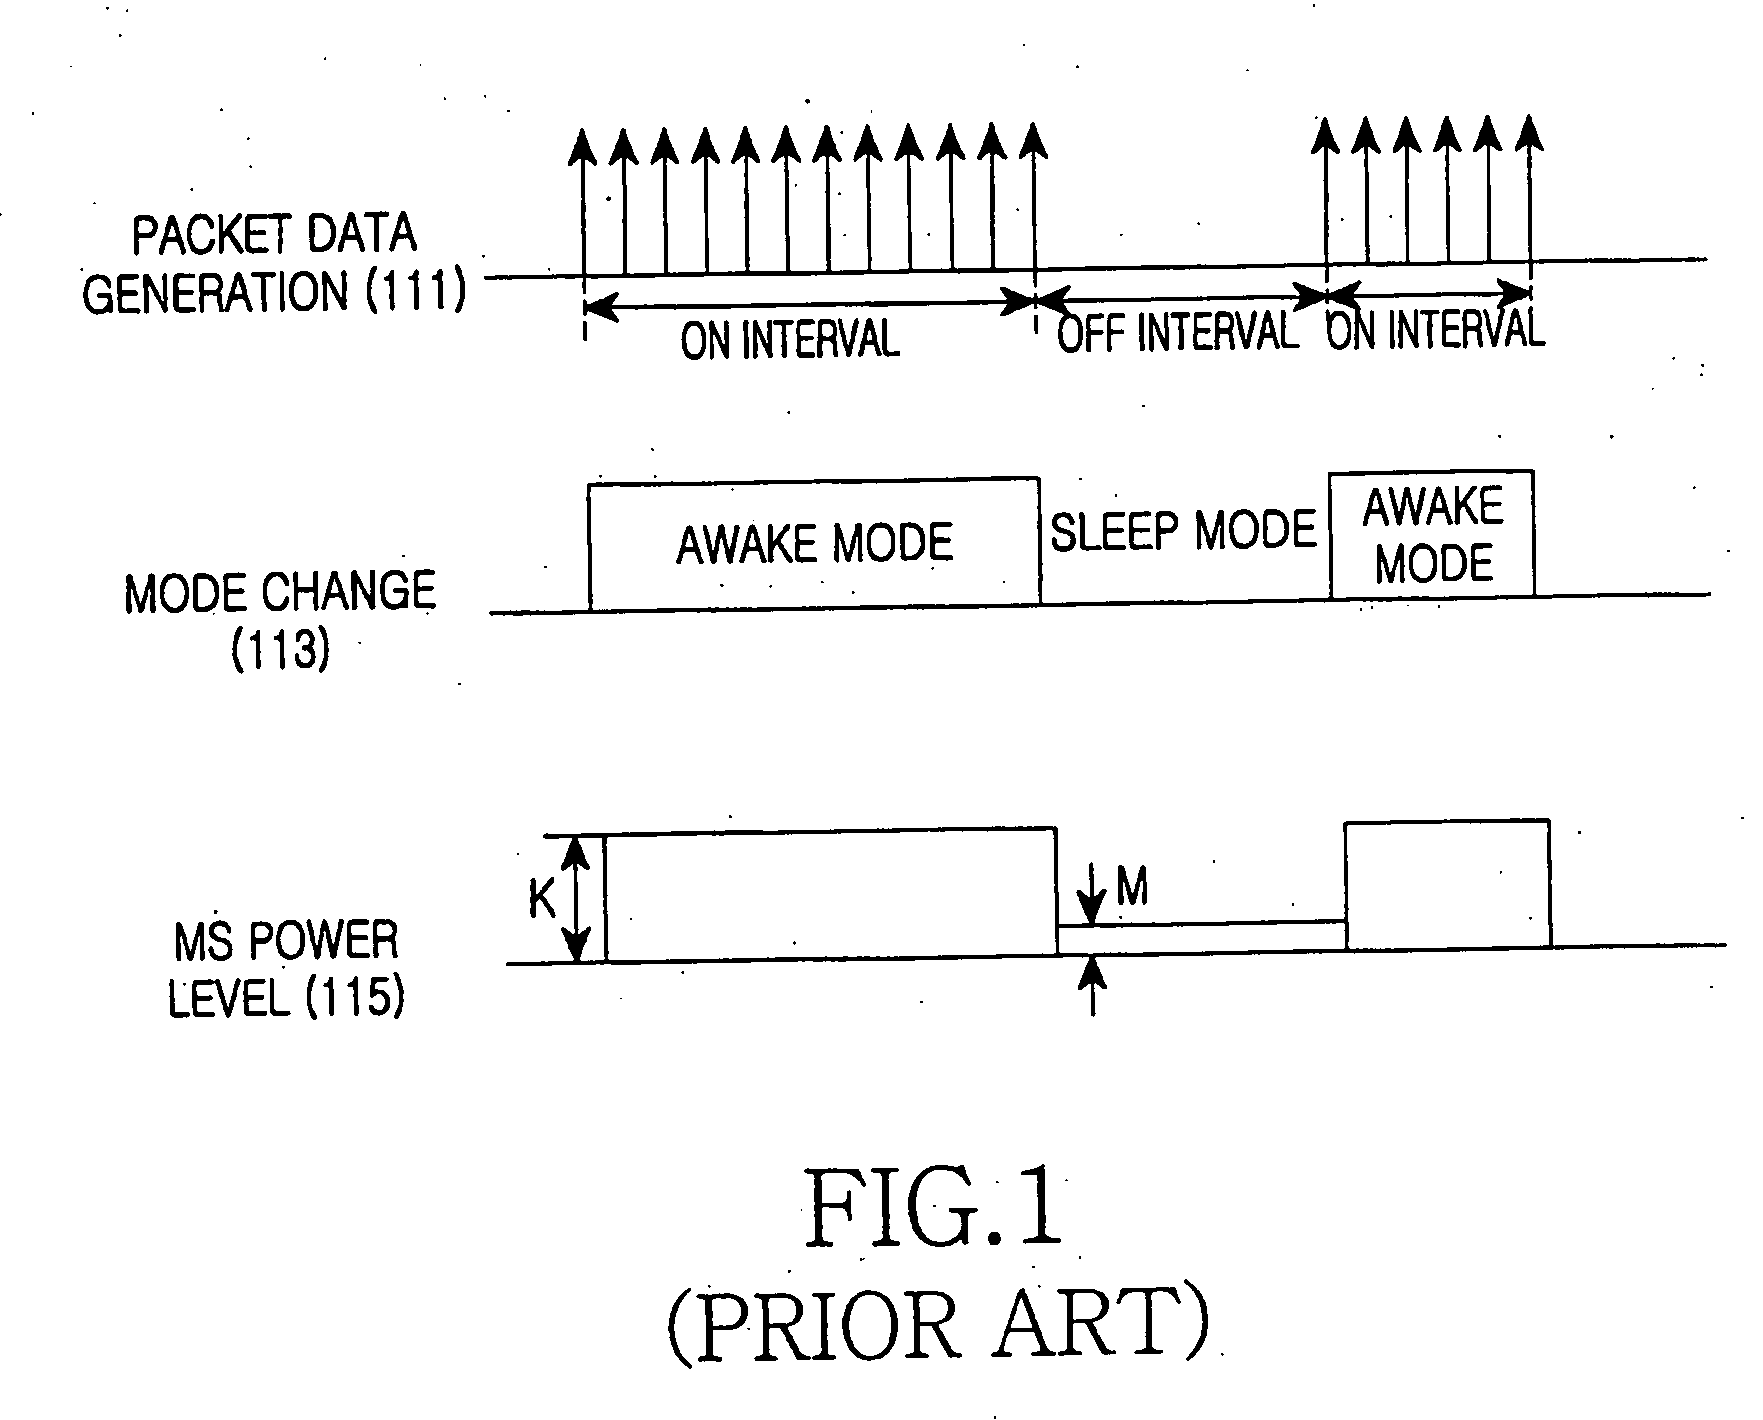 System and method for supporting sleep mode operation in a wireless communication system